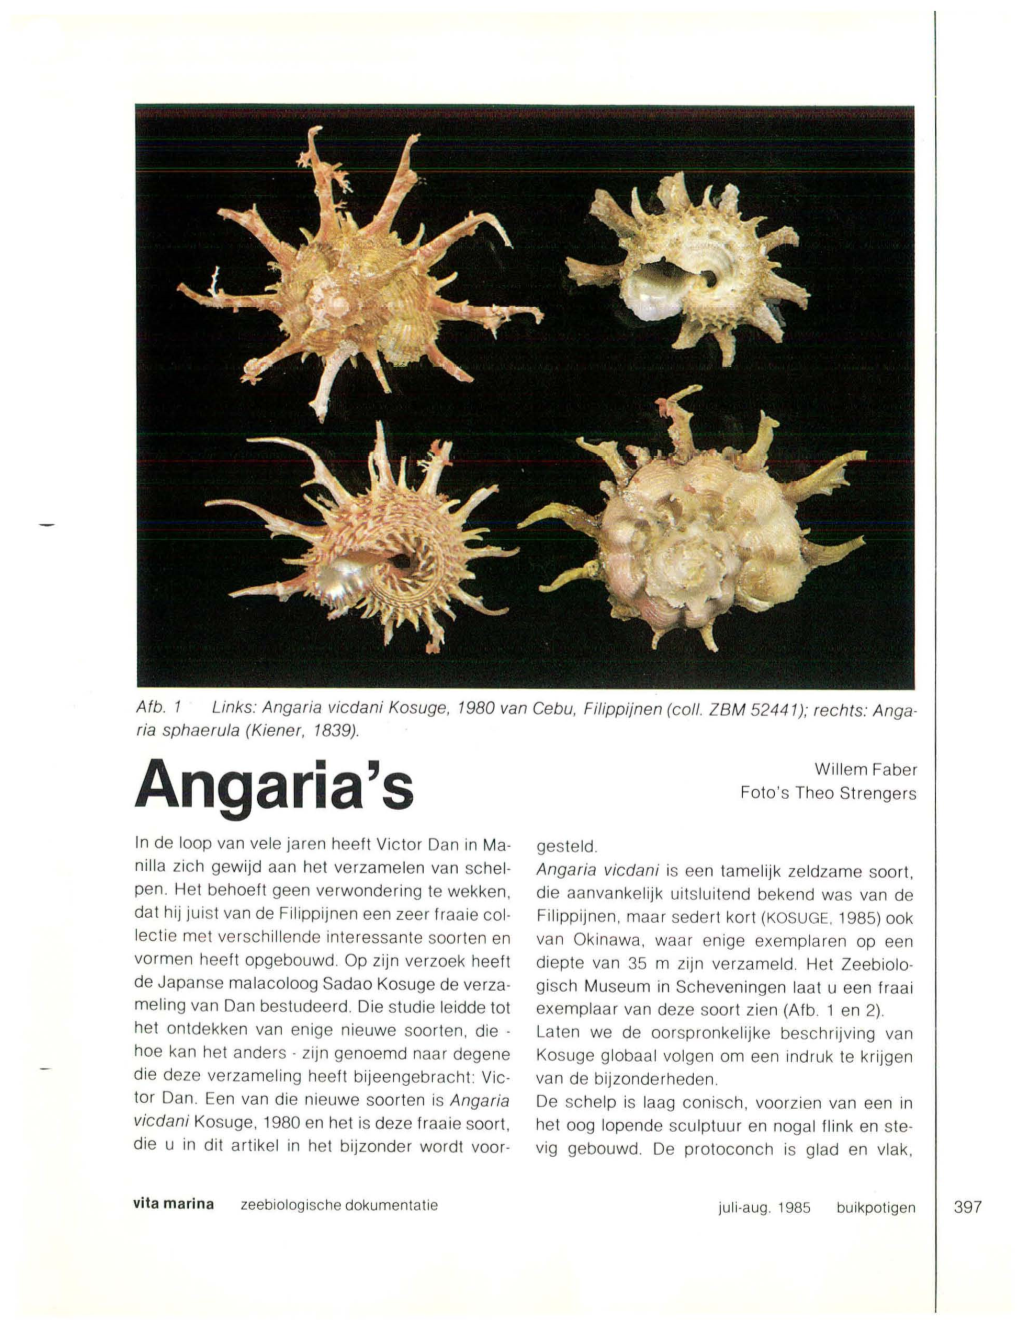 Angaria's Foto's Theo Stre Ngers